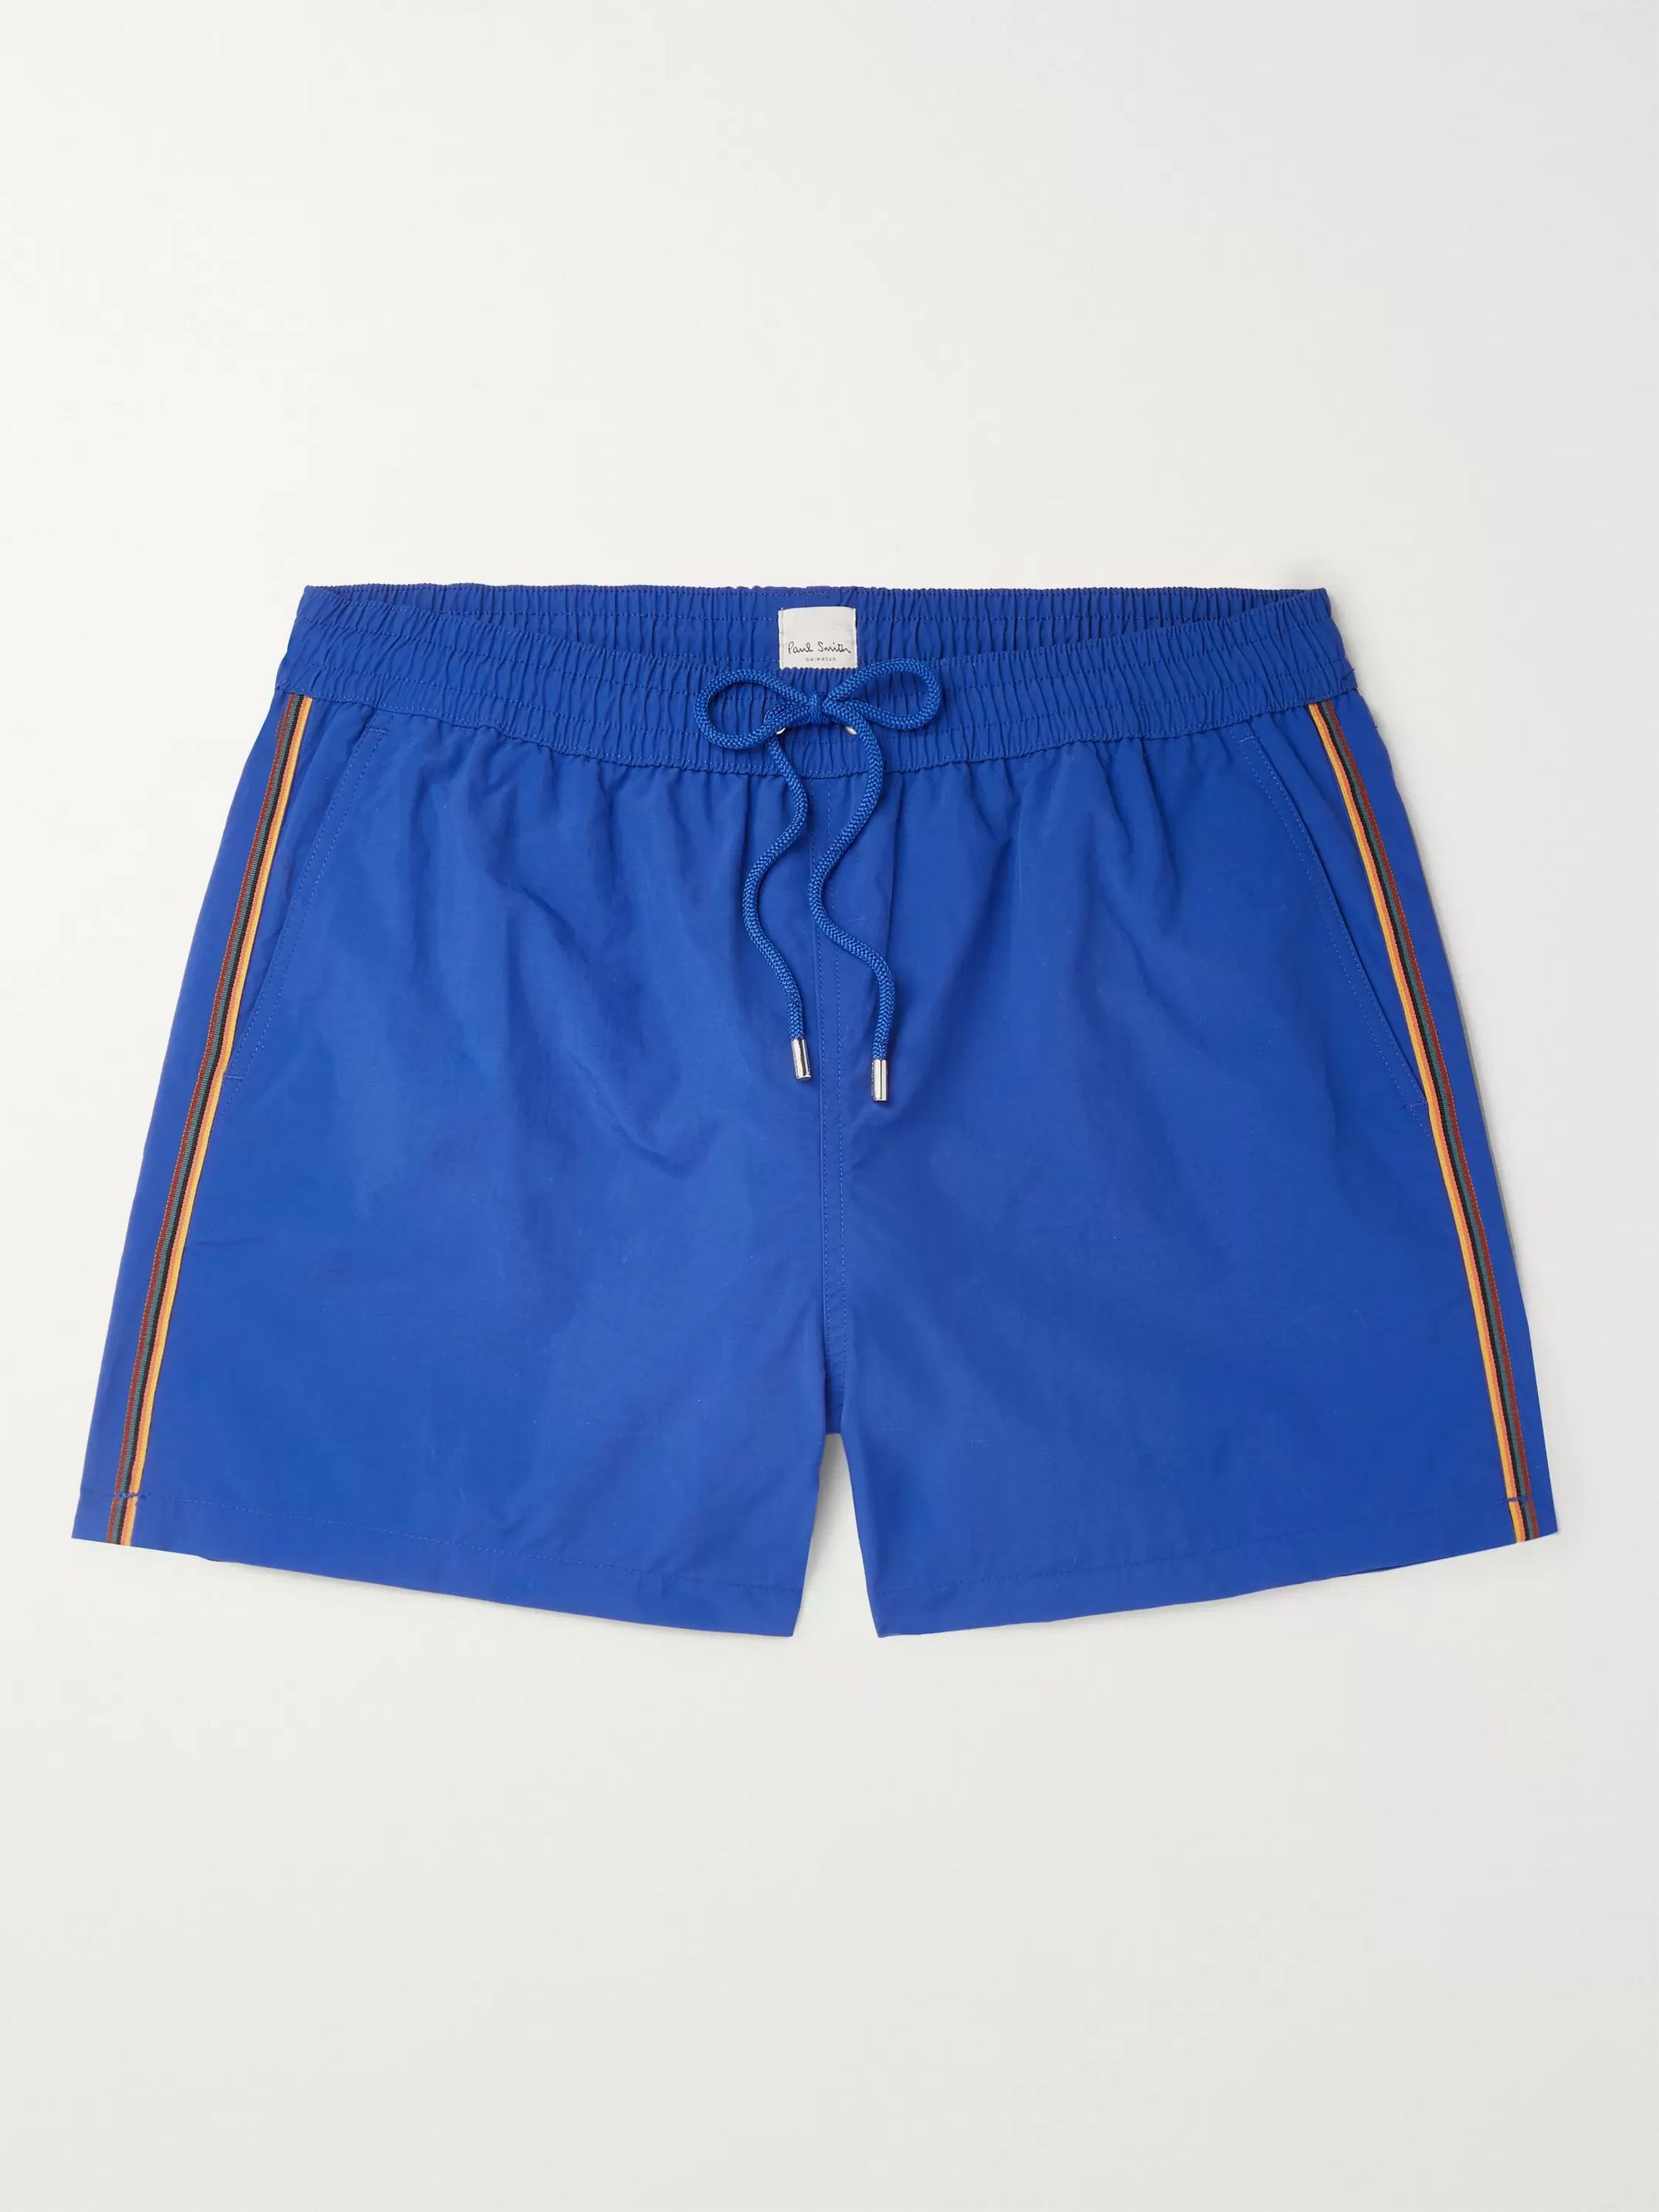 Paul Smith Swimming Trunks Top Sellers, UP TO 69% OFF | www 